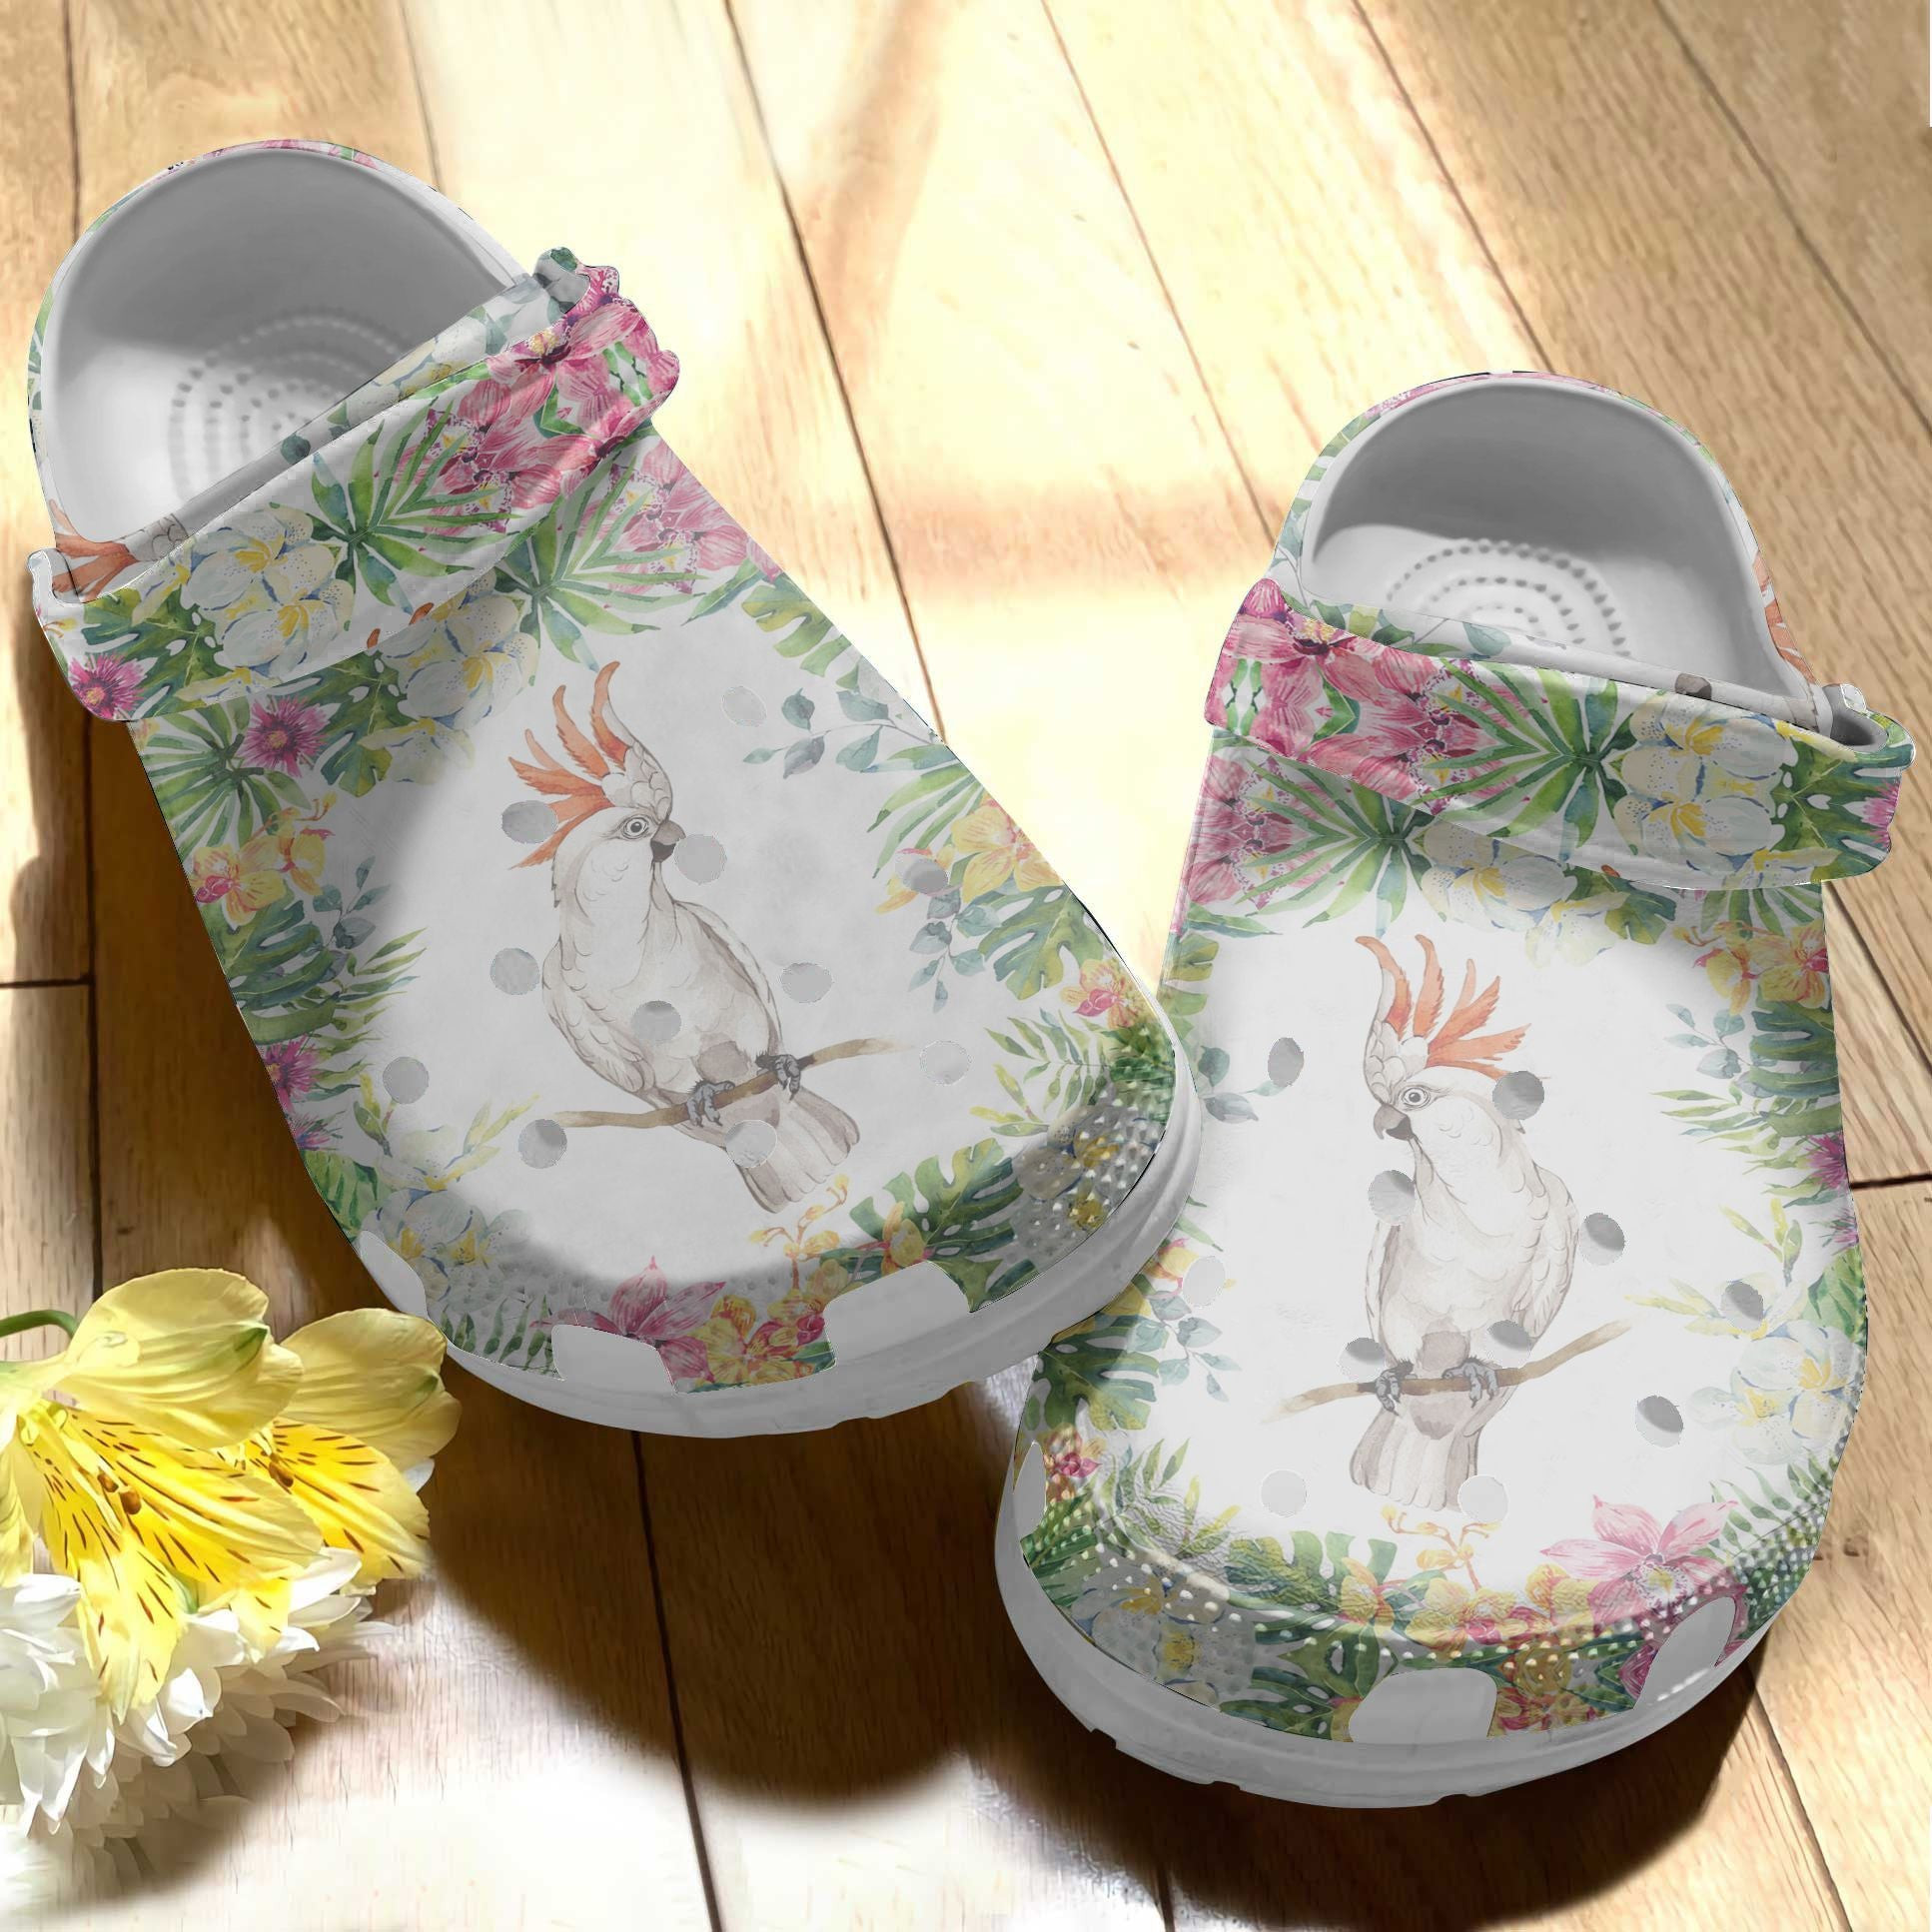 Birds Flower White Parrot Flower Crocs Shoes – Cockatoo Shoes Crocbland Clog Birthday Gifts For Woman Daughter Mother